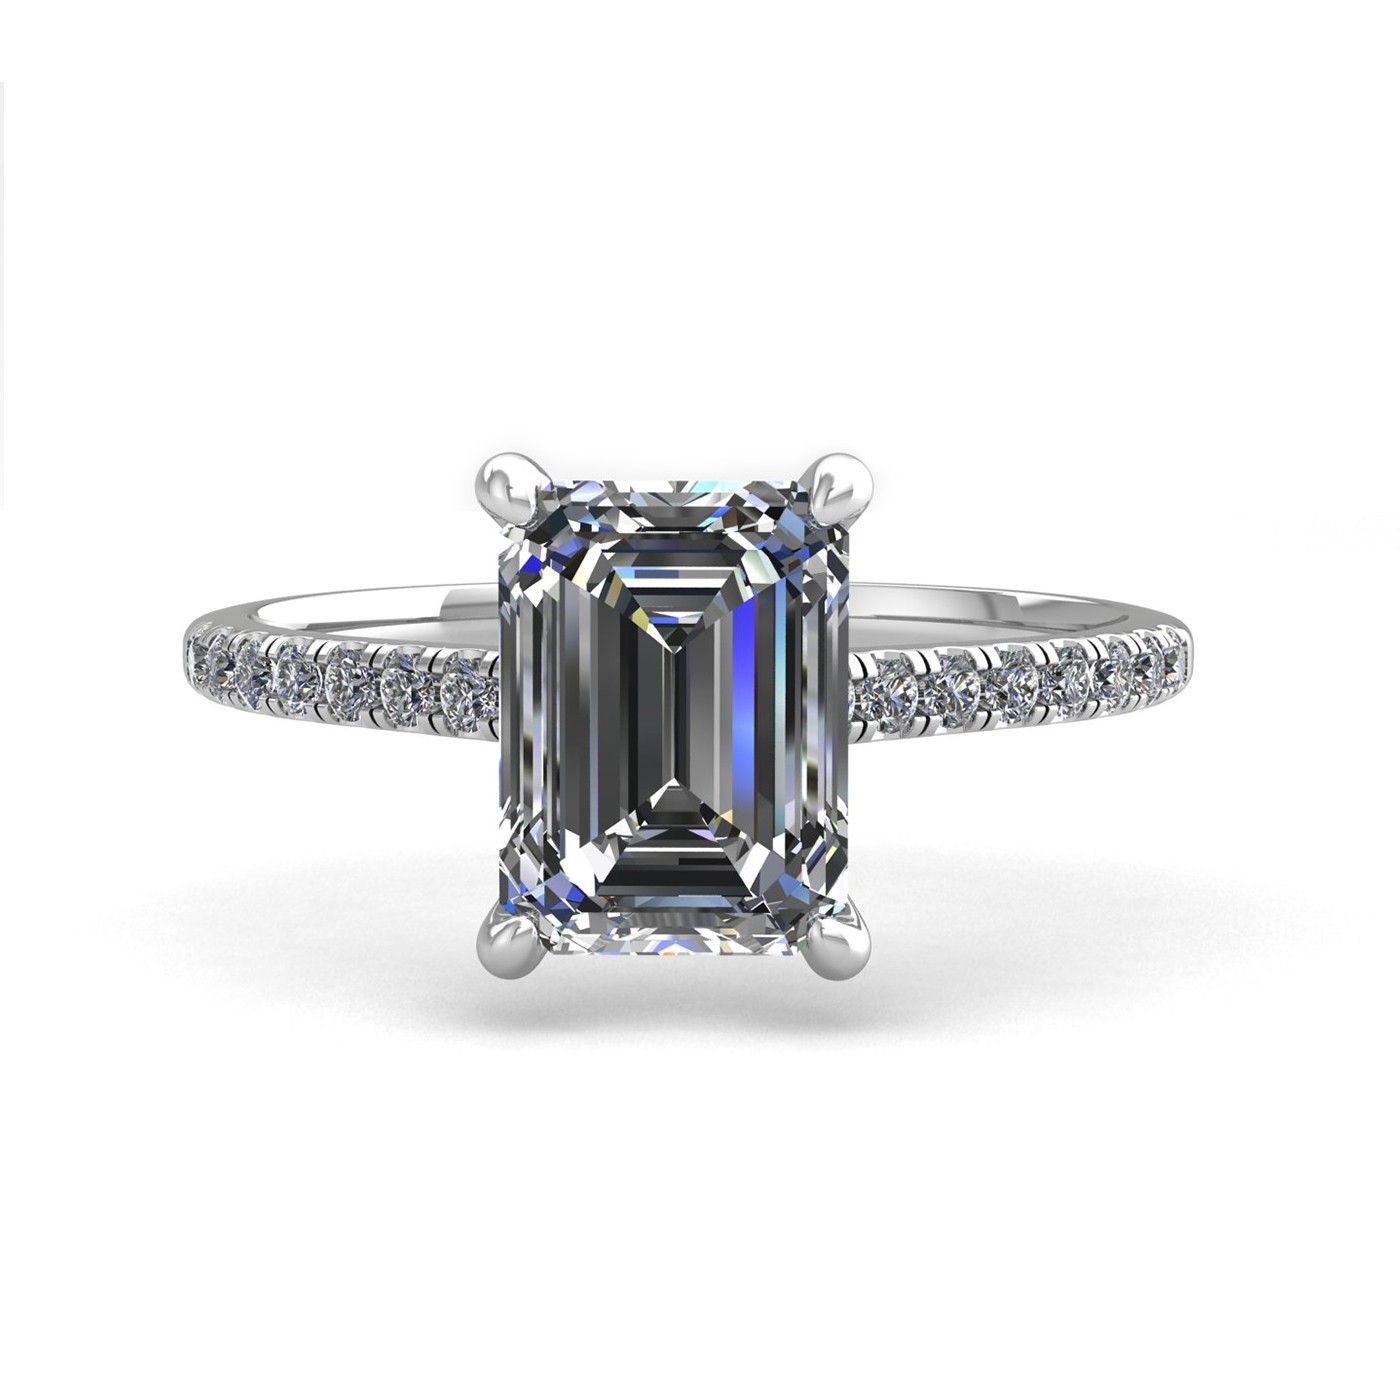 18k white gold 1.5ct 4 prongs emerald cut diamond engagement ring with whisper thin pavÉ set band